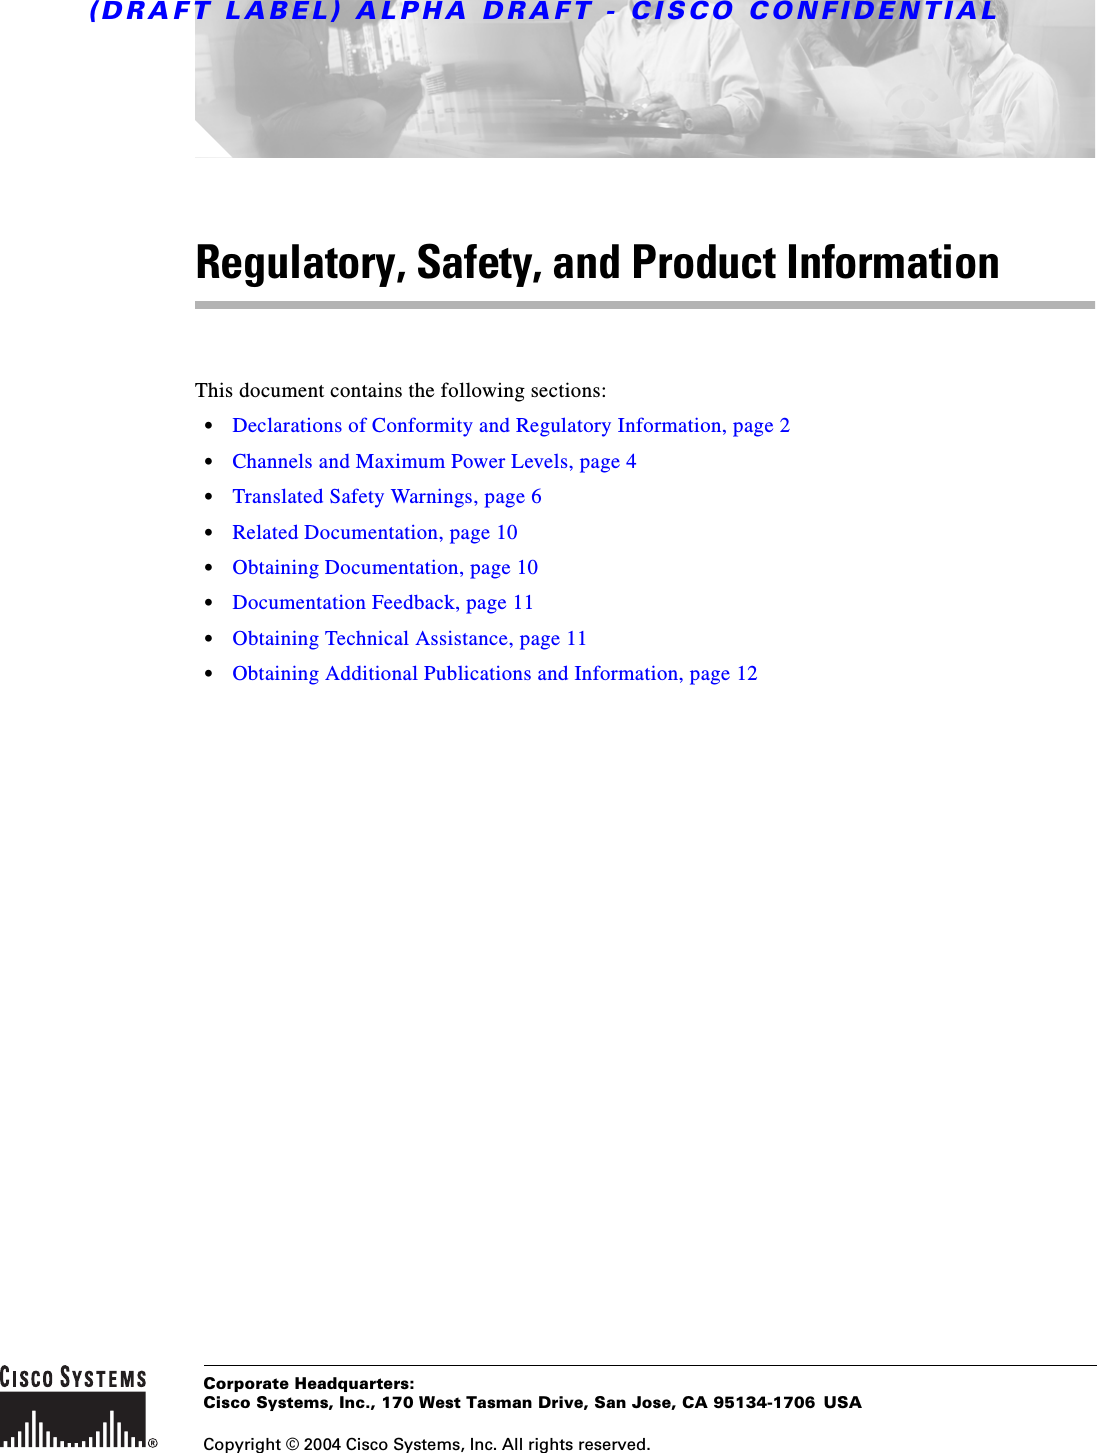 (DRAFT LABEL) ALPHA DRAFT - CISCO CONFIDENTIALCorporate Headquarters:Copyright © 2004 Cisco Systems, Inc. All rights reserved.Cisco Systems, Inc., 170 West Tasman Drive, San Jose, CA 95134-1706 USARegulatory, Safety, and Product InformationThis document contains the following sections:•Declarations of Conformity and Regulatory Information, page 2•Channels and Maximum Power Levels, page 4•Translated Safety Warnings, page 6•Related Documentation, page 10•Obtaining Documentation, page 10•Documentation Feedback, page 11•Obtaining Technical Assistance, page 11•Obtaining Additional Publications and Information, page 12